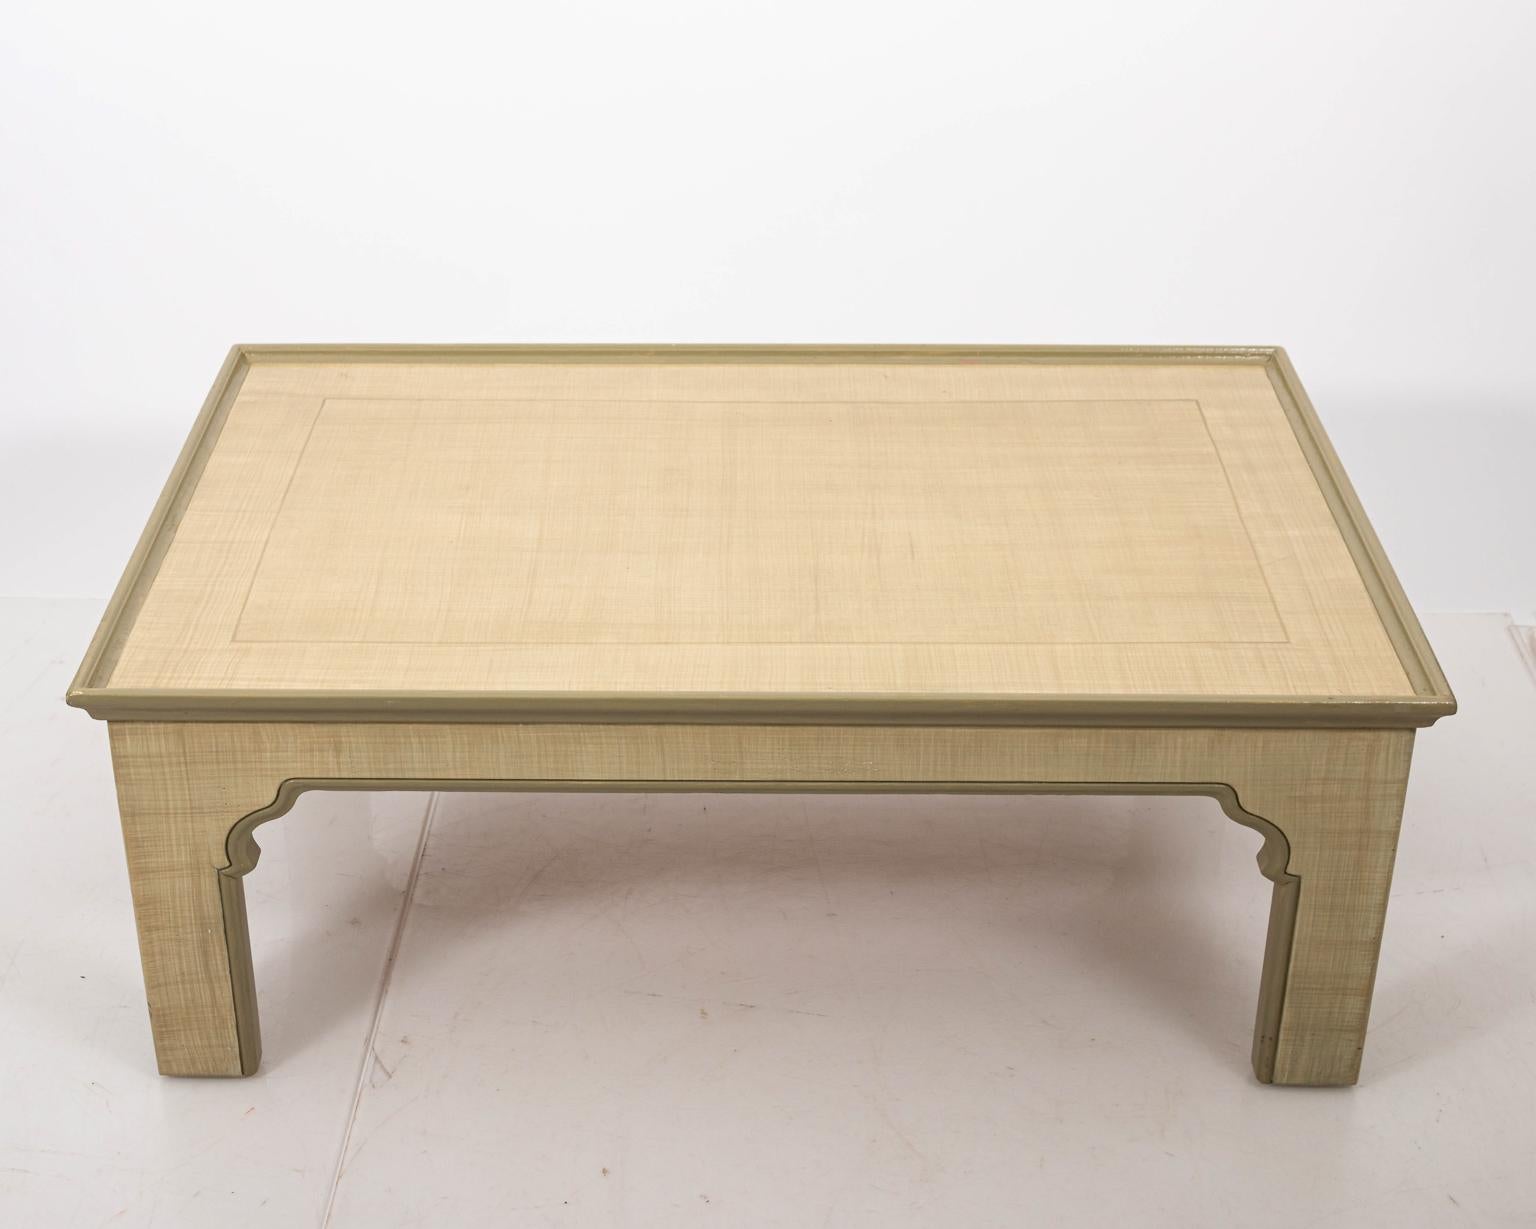 Hand stained cream white coffee table with scalloped detail by Bob Christian, circa 1980s. Made in the United States. Please note of wear consistent with age.